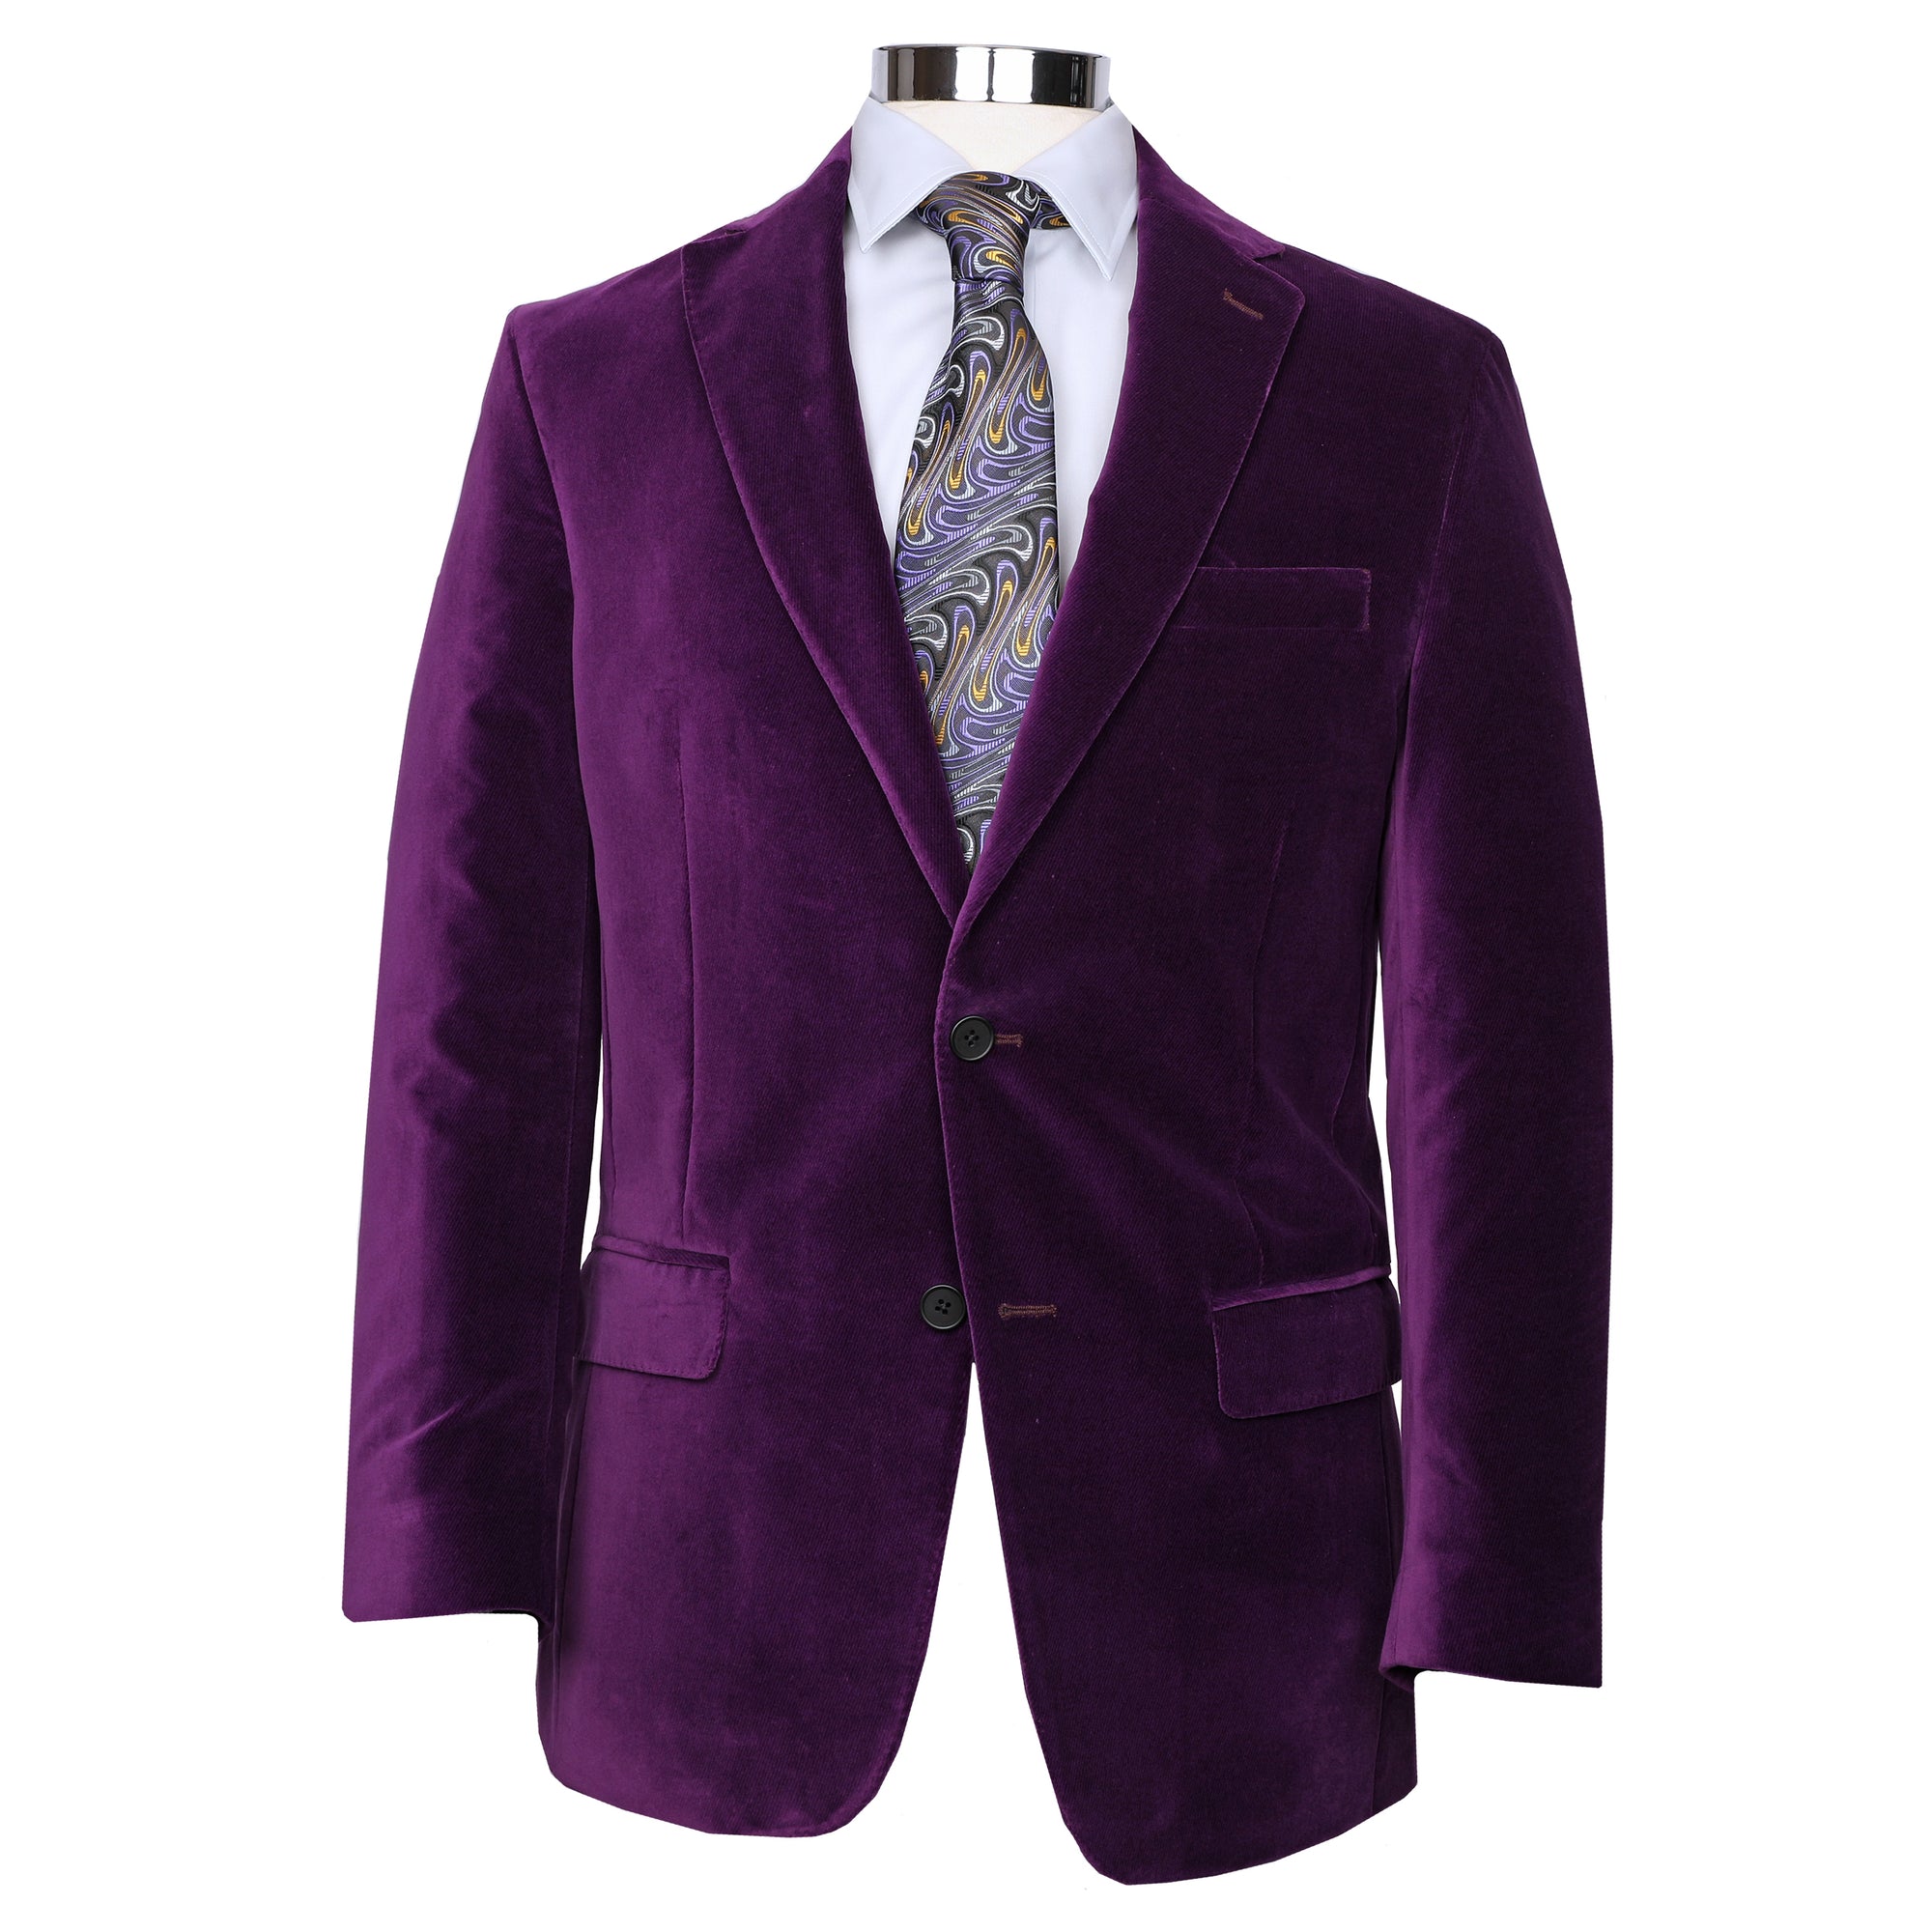 Make a statement at your next dinner party in this purple Audubon jacket! A fun and smooth velvet material will make you feel cool and comfortable, while you show up your friends!  100% cotton • Audubon Classic Fit • Natural Shoulder • Two Button Closure• Flap Pockets • 3/4 Lined • 2 Side Vents • Satin Notch Lapel • Dry Clean Only